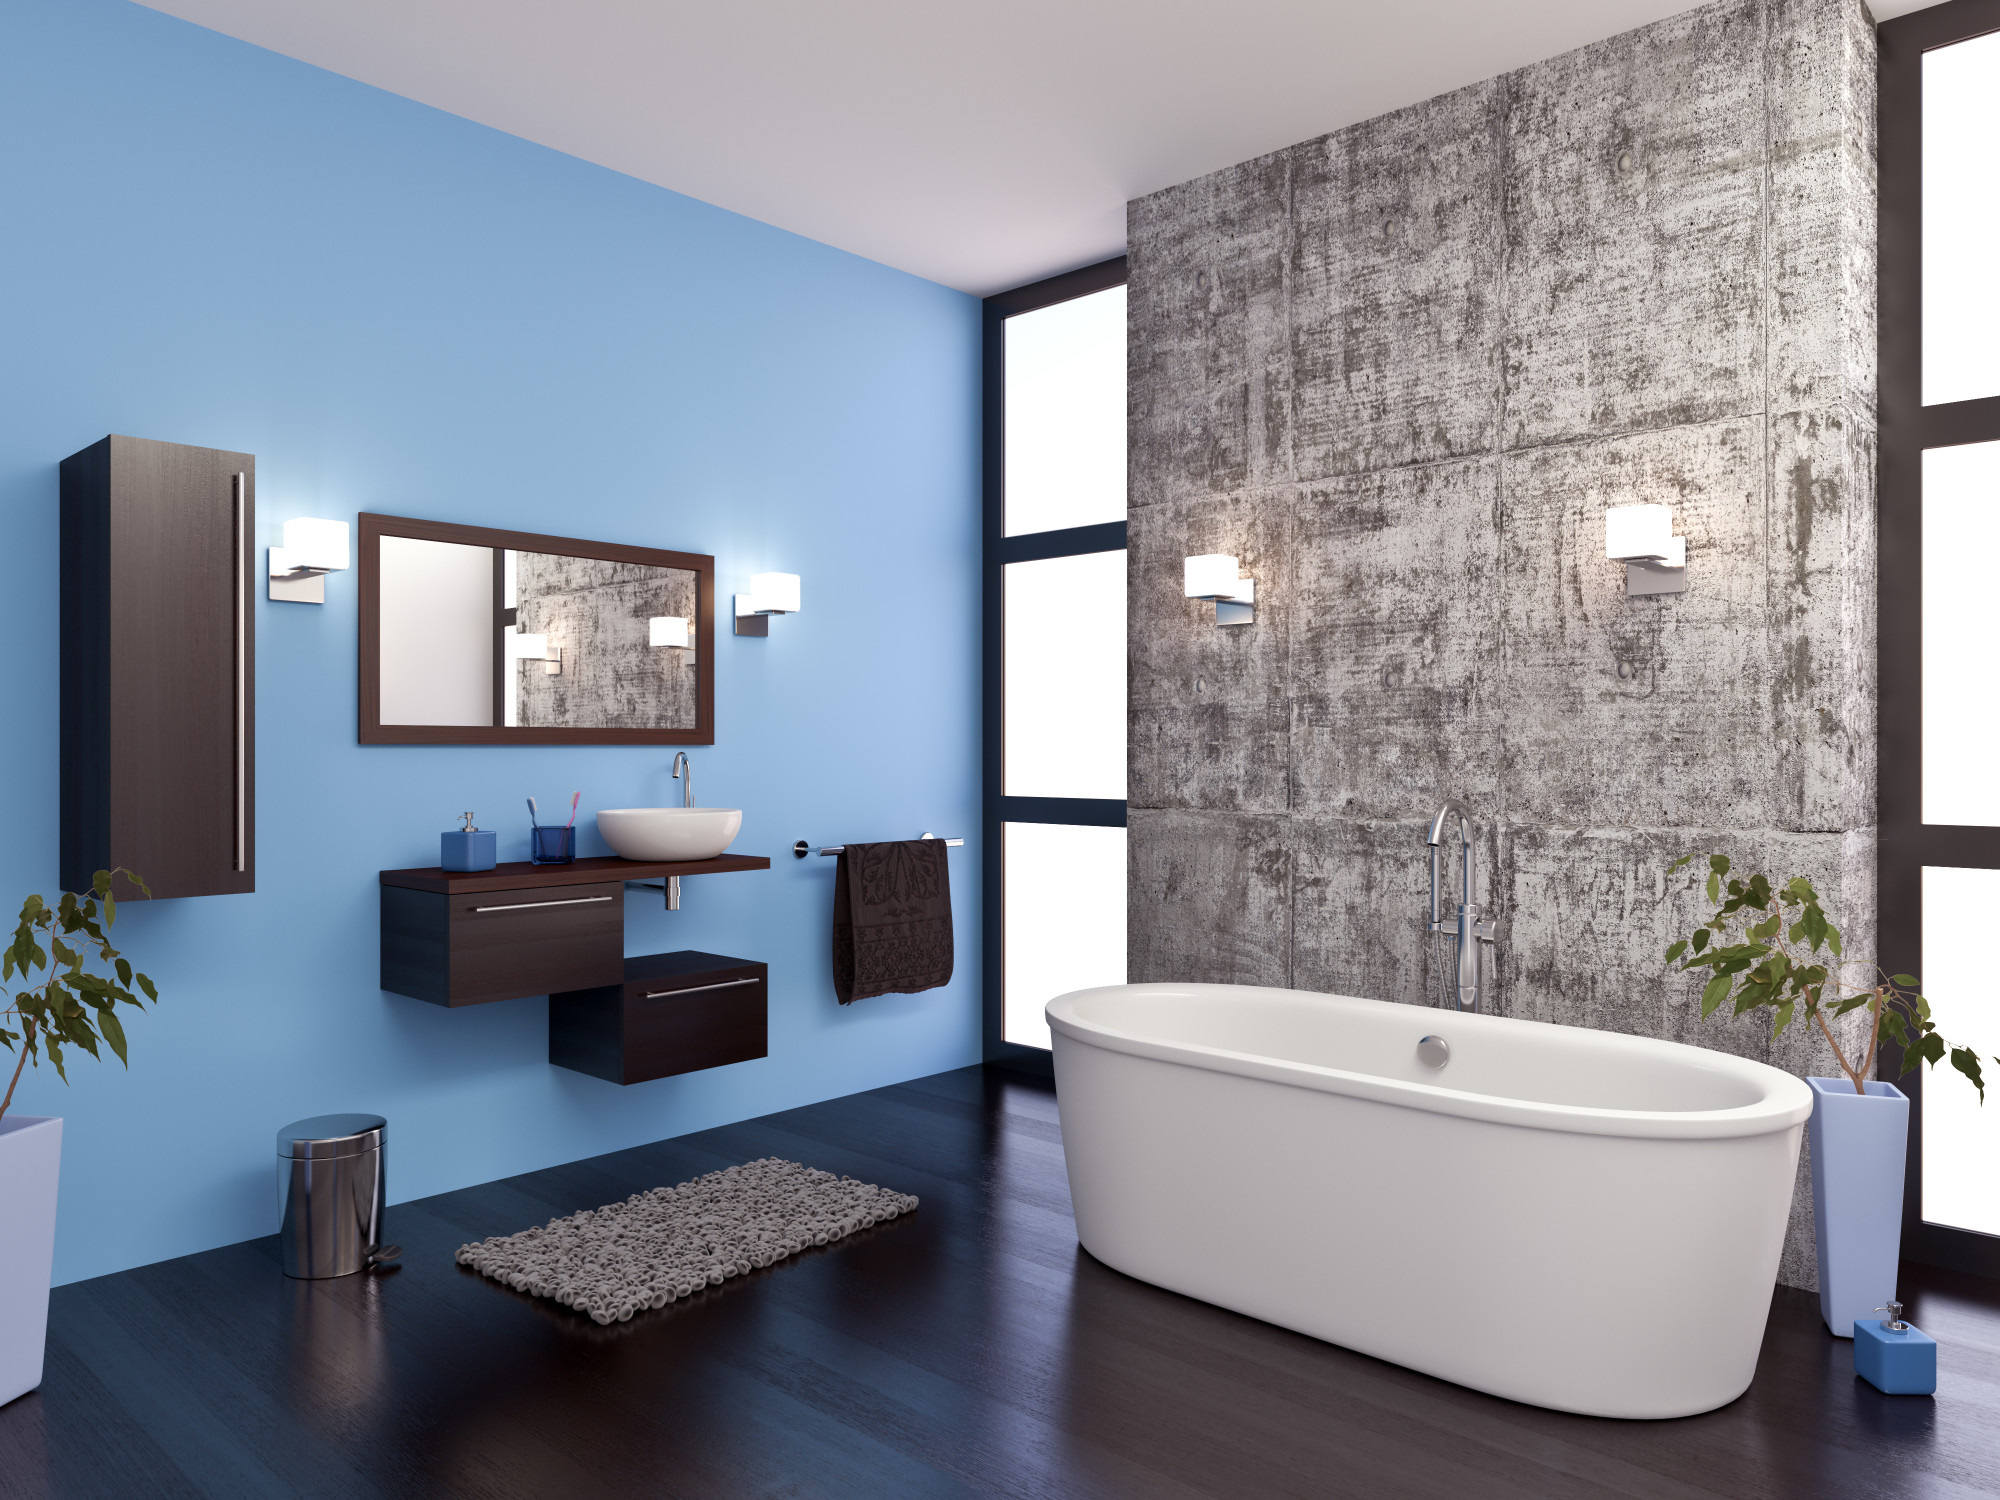 9 Tips to Designing Your Dream Bathroom